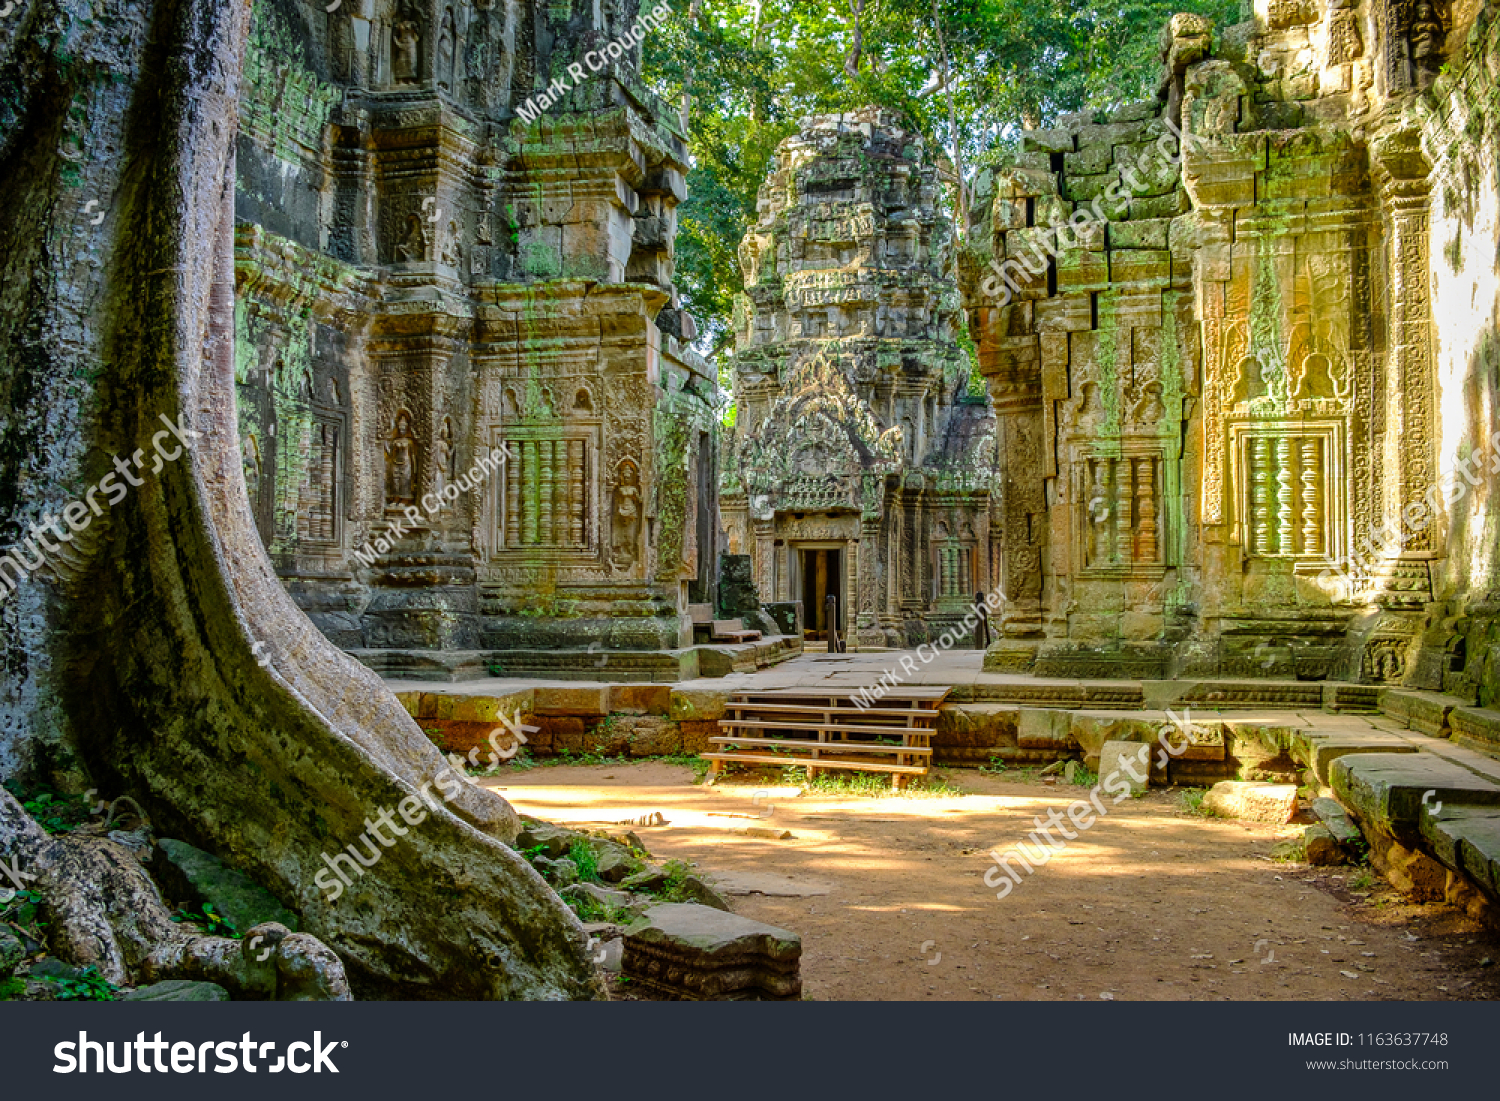 Ta Prohm temple in the morning light. Part of the Angkor Wat complex, Seam Reap, Cambodia. Film location for Tomb Raider. #1163637748